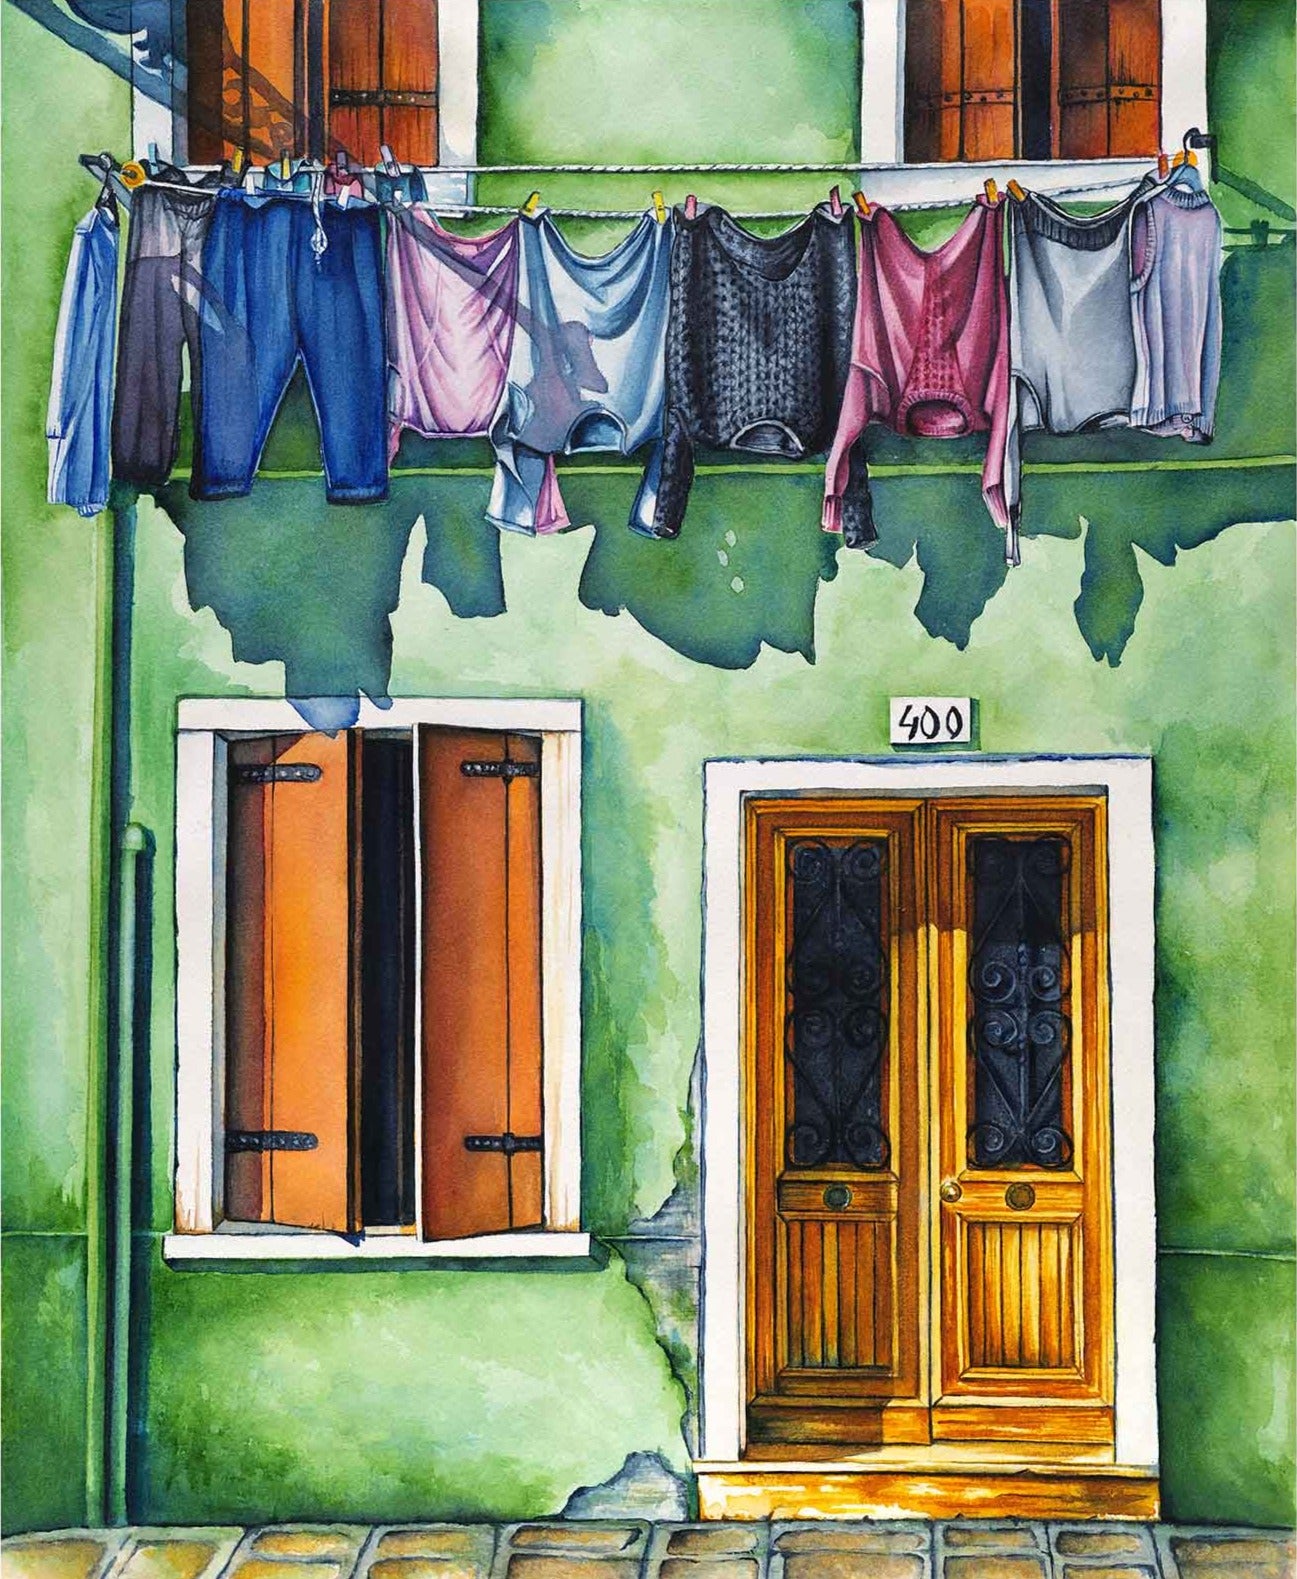 Clothesline on Green House - Giclée Watercolor Print